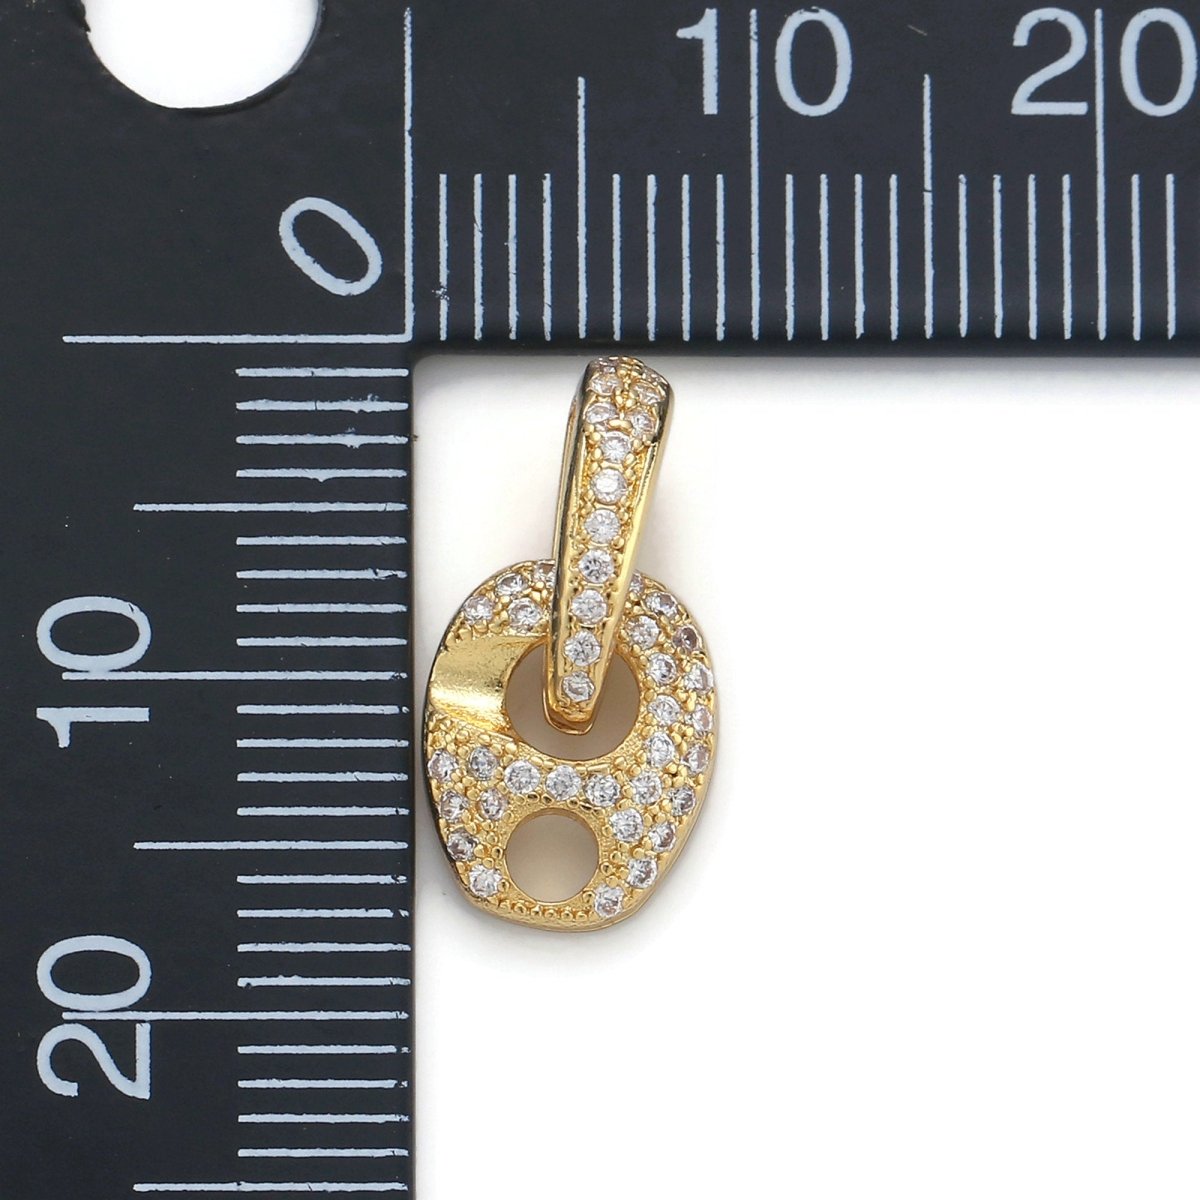 24k Gold Filled Micro Pave CZ Geometric Pendant Charm, Micro Pave Soda Cap Earring Pendant Charm, Gold Filled Pendant, For DIY Jewelry K-553 - DLUXCA